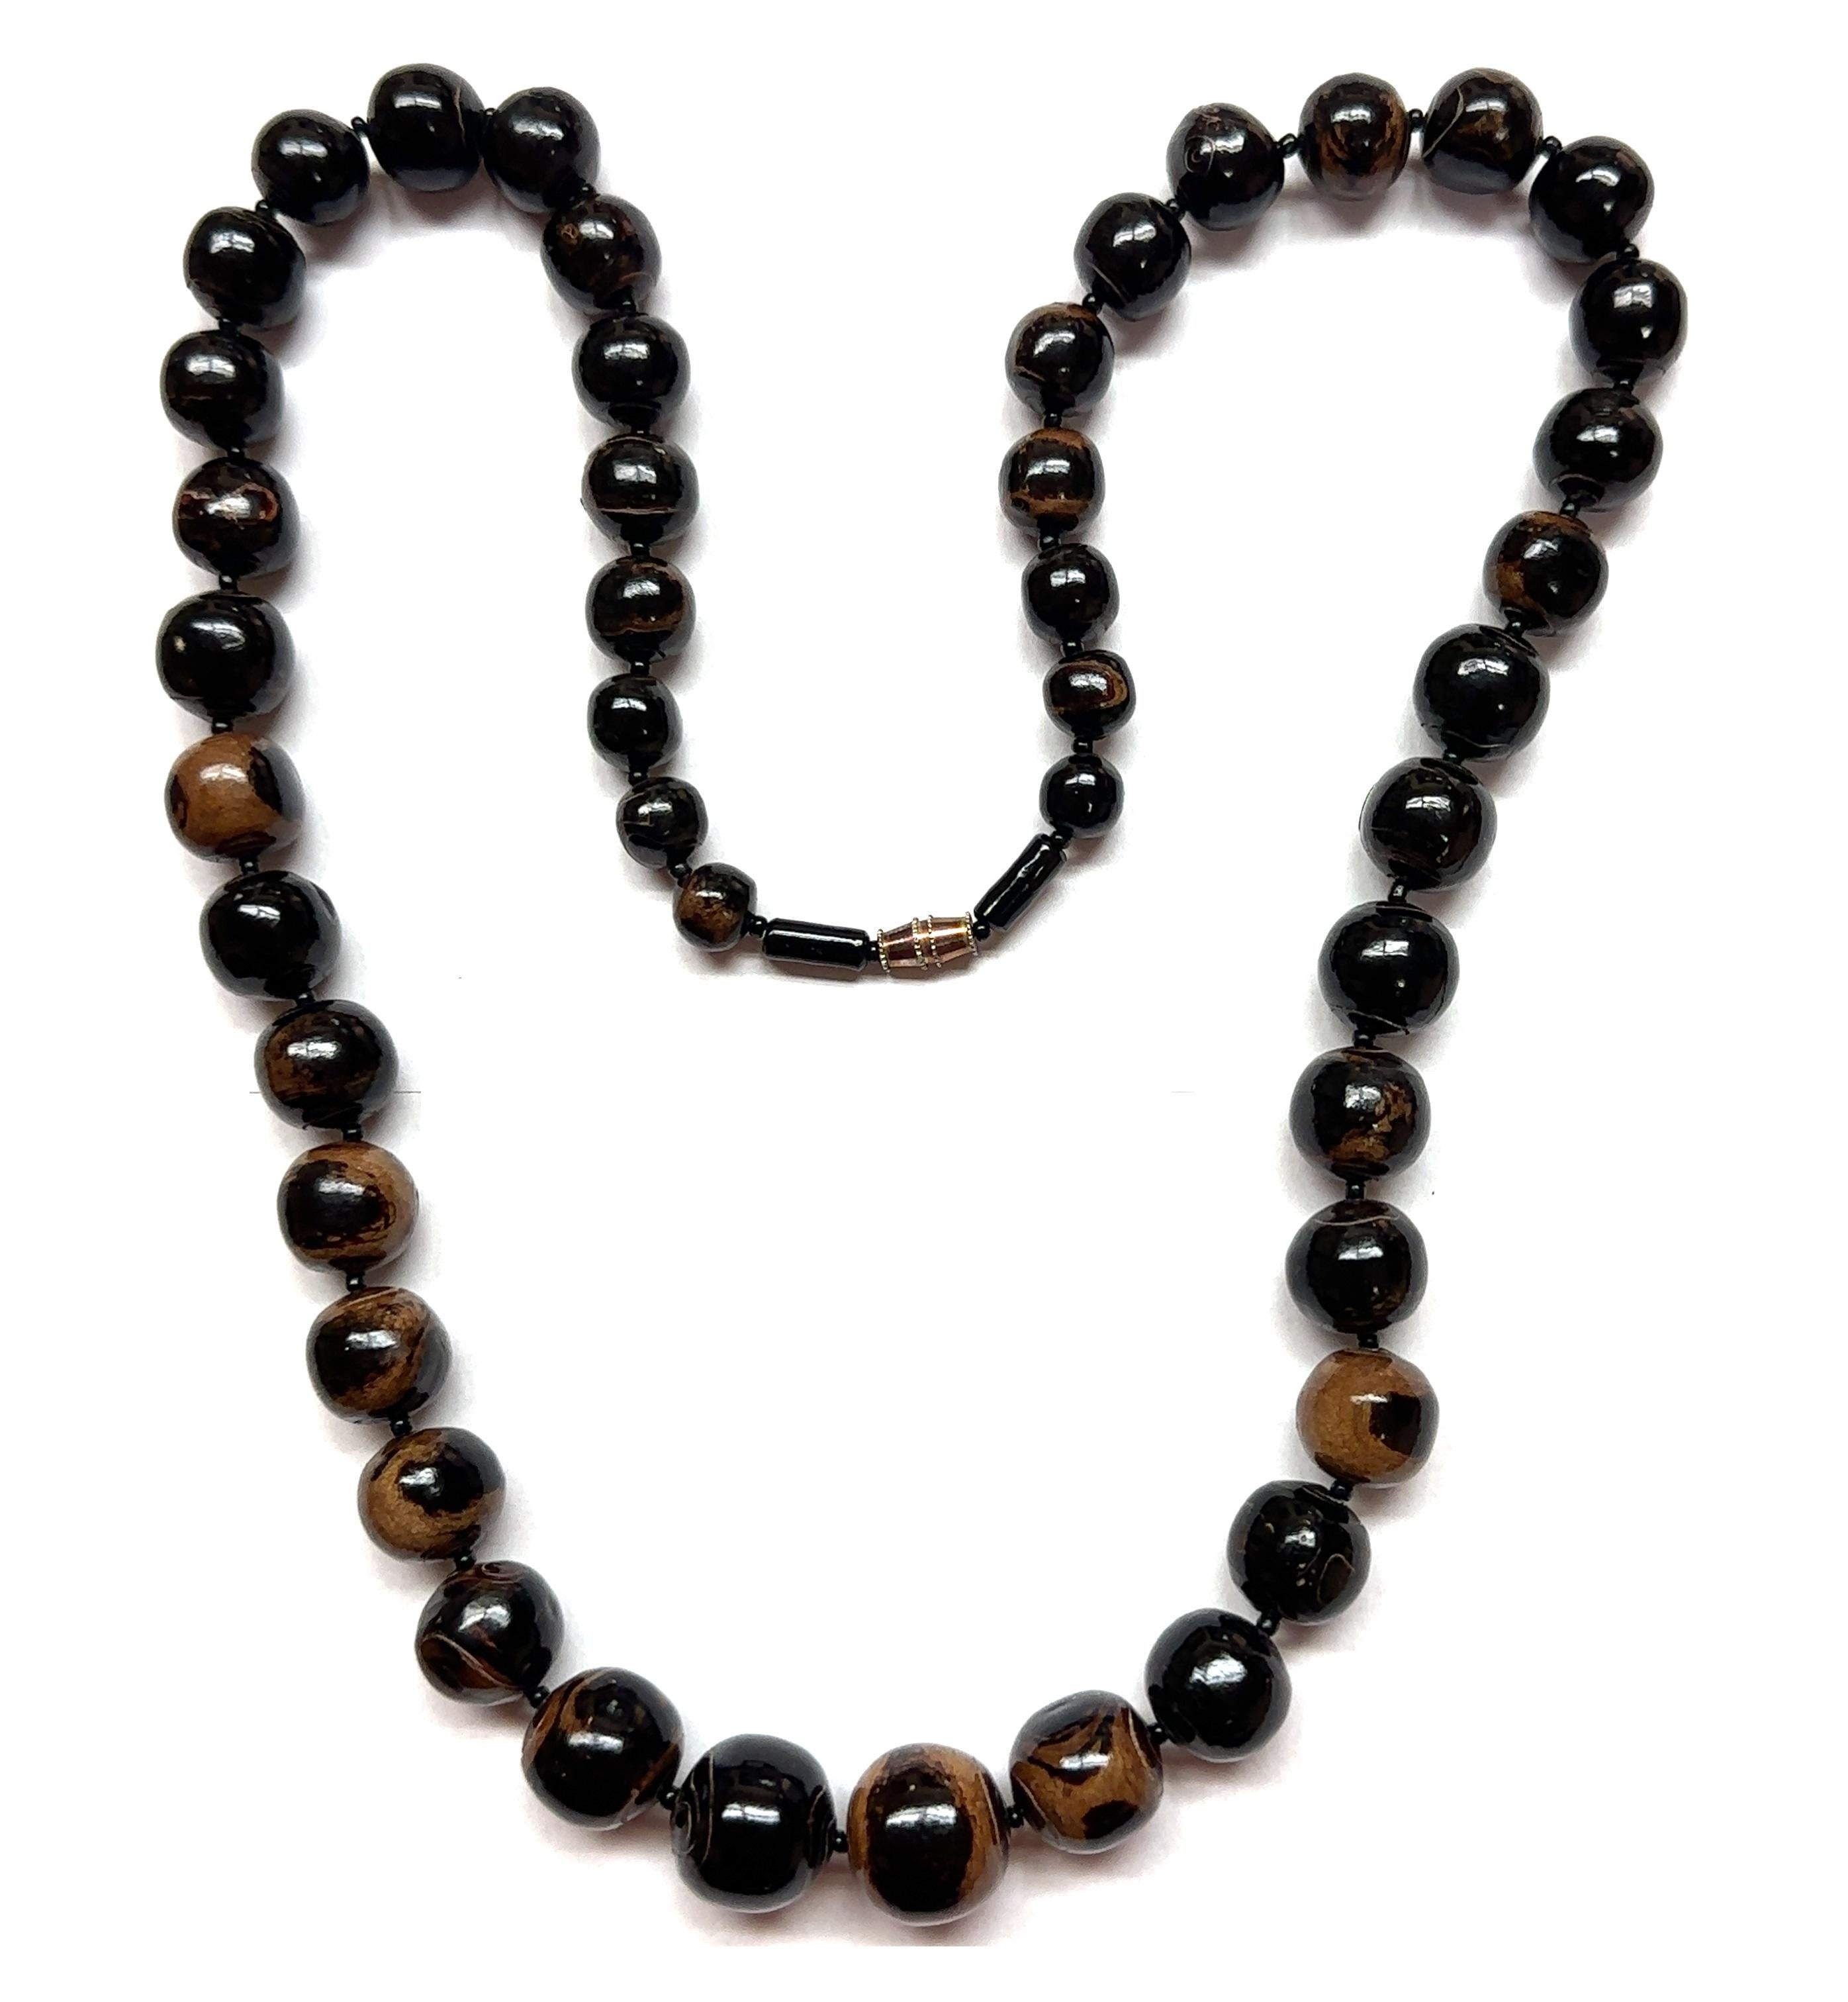 Black Coral necklace - 26.5 inches Natural Black Coral Graduated Bead Necklace In Good Condition For Sale In New York, NY